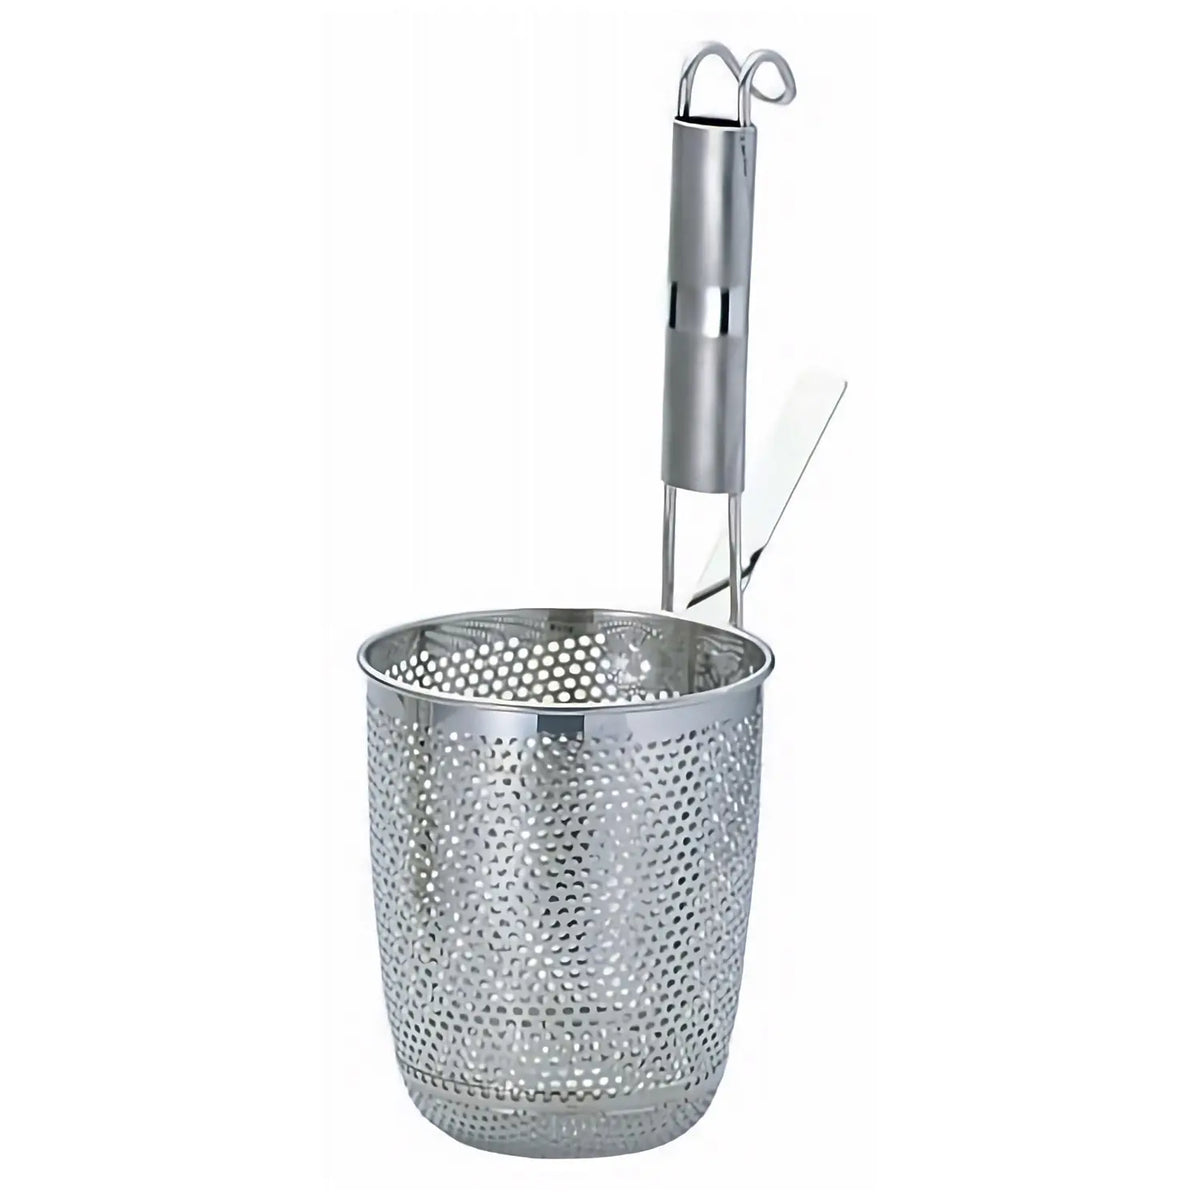 YUKIWA Eco Clean Stainless Steel Perforated Tebo Noodle Strainer Round Base with Metal Handle